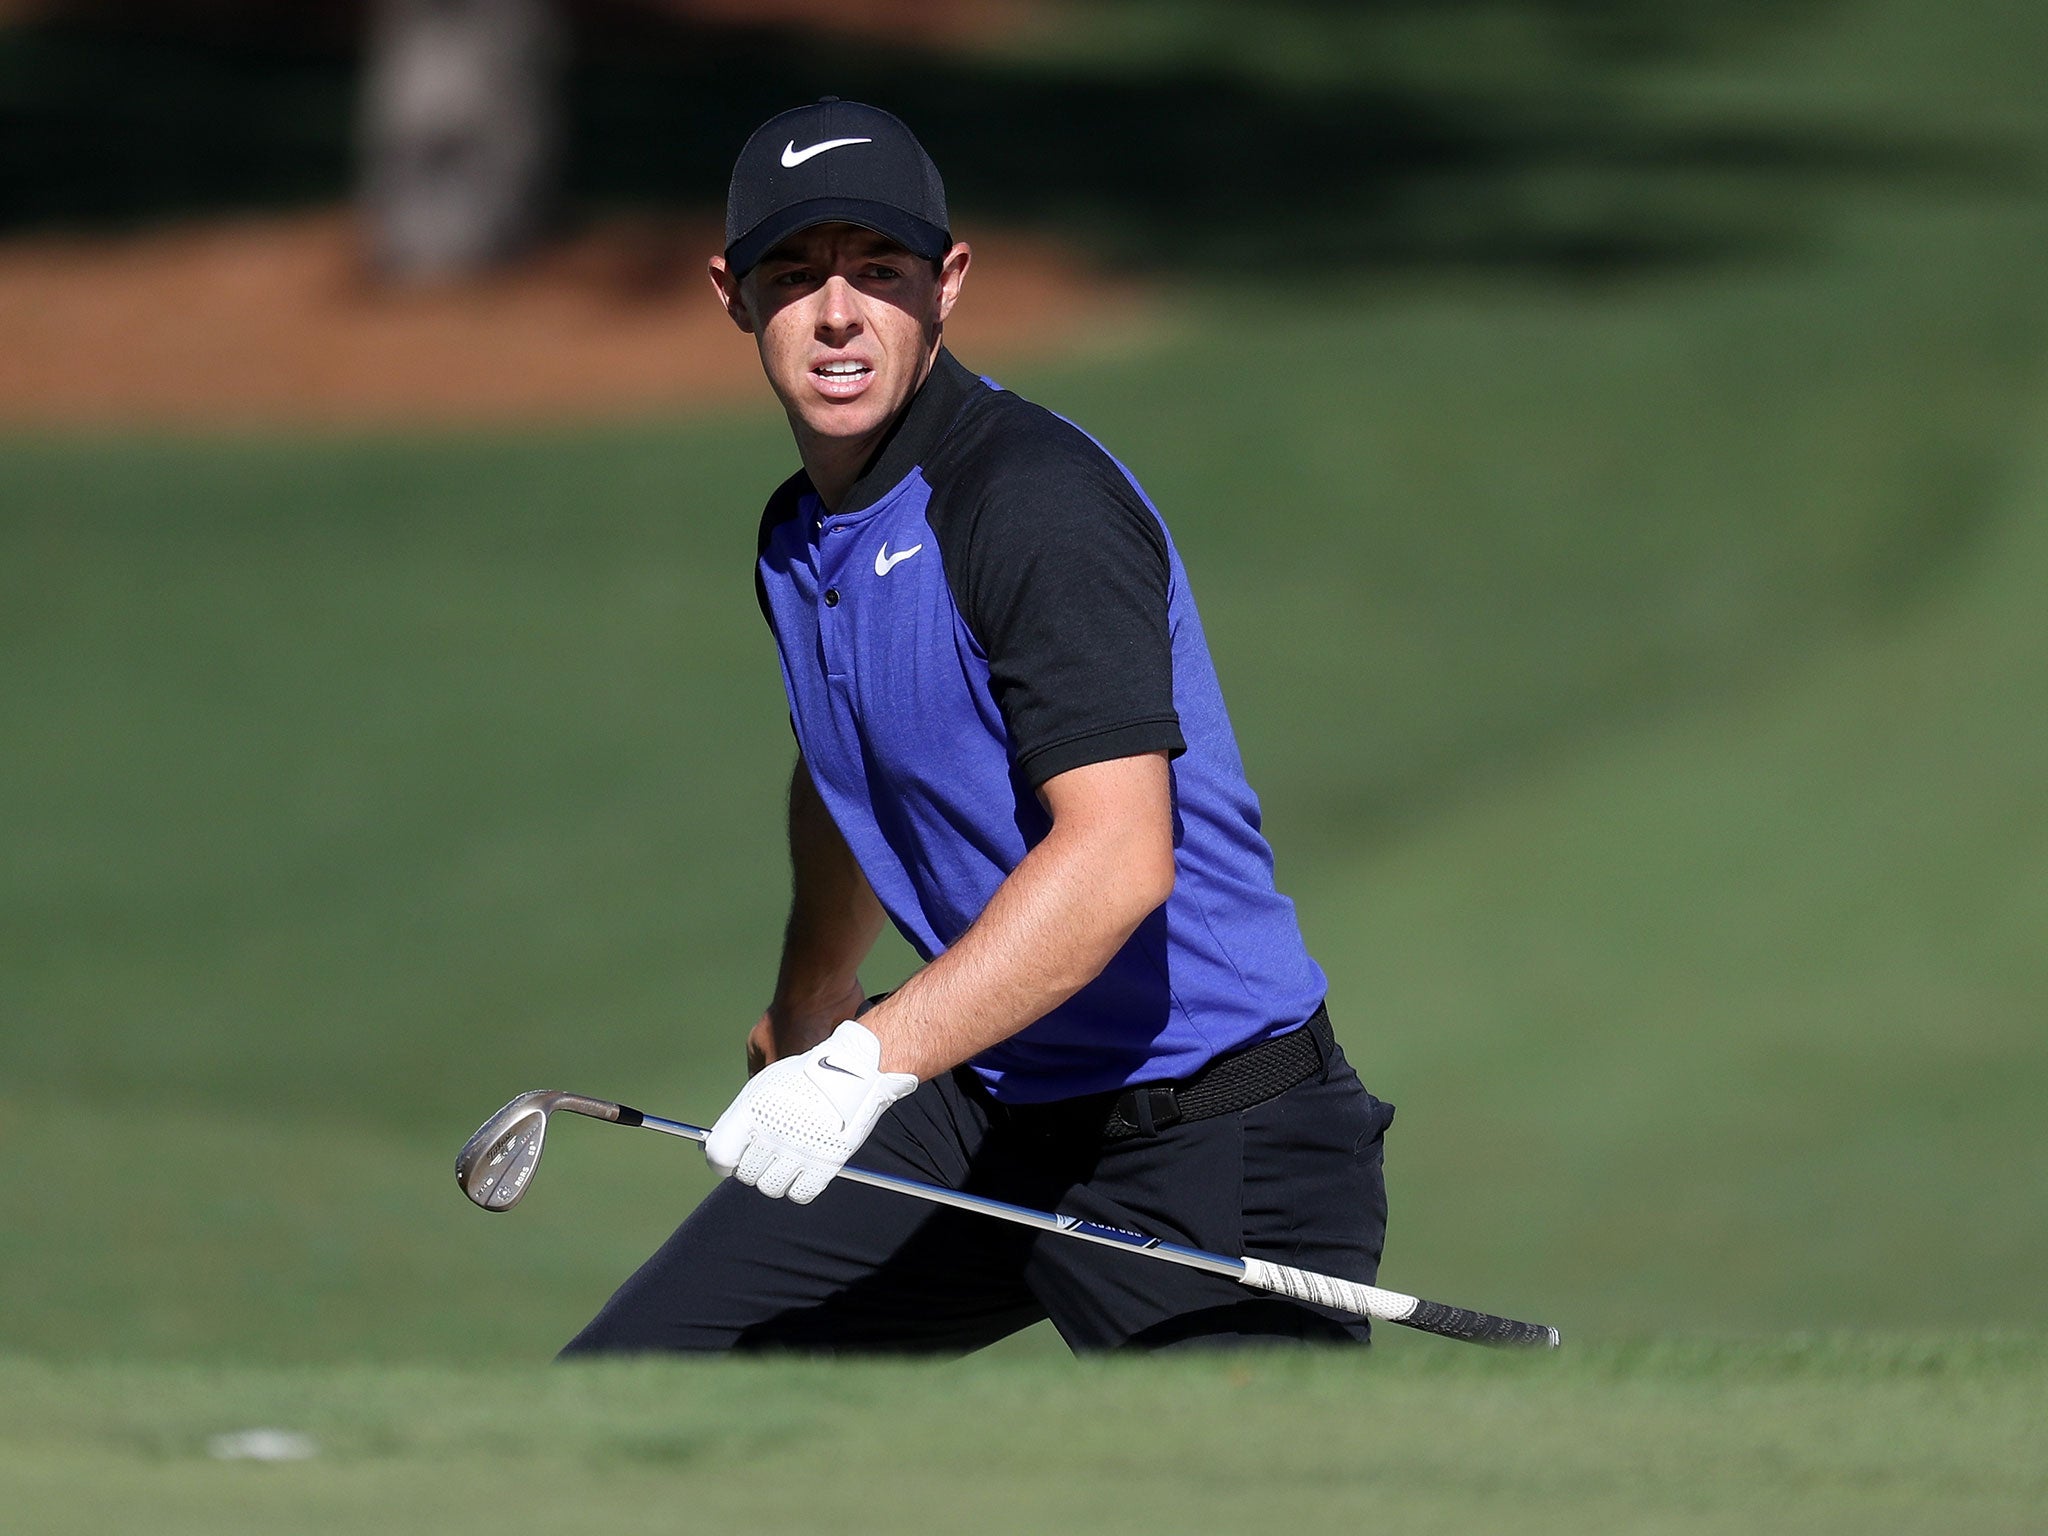 Rory McIlroy admitted that those who know him best will confirm he is not his usual calm self at the Masters